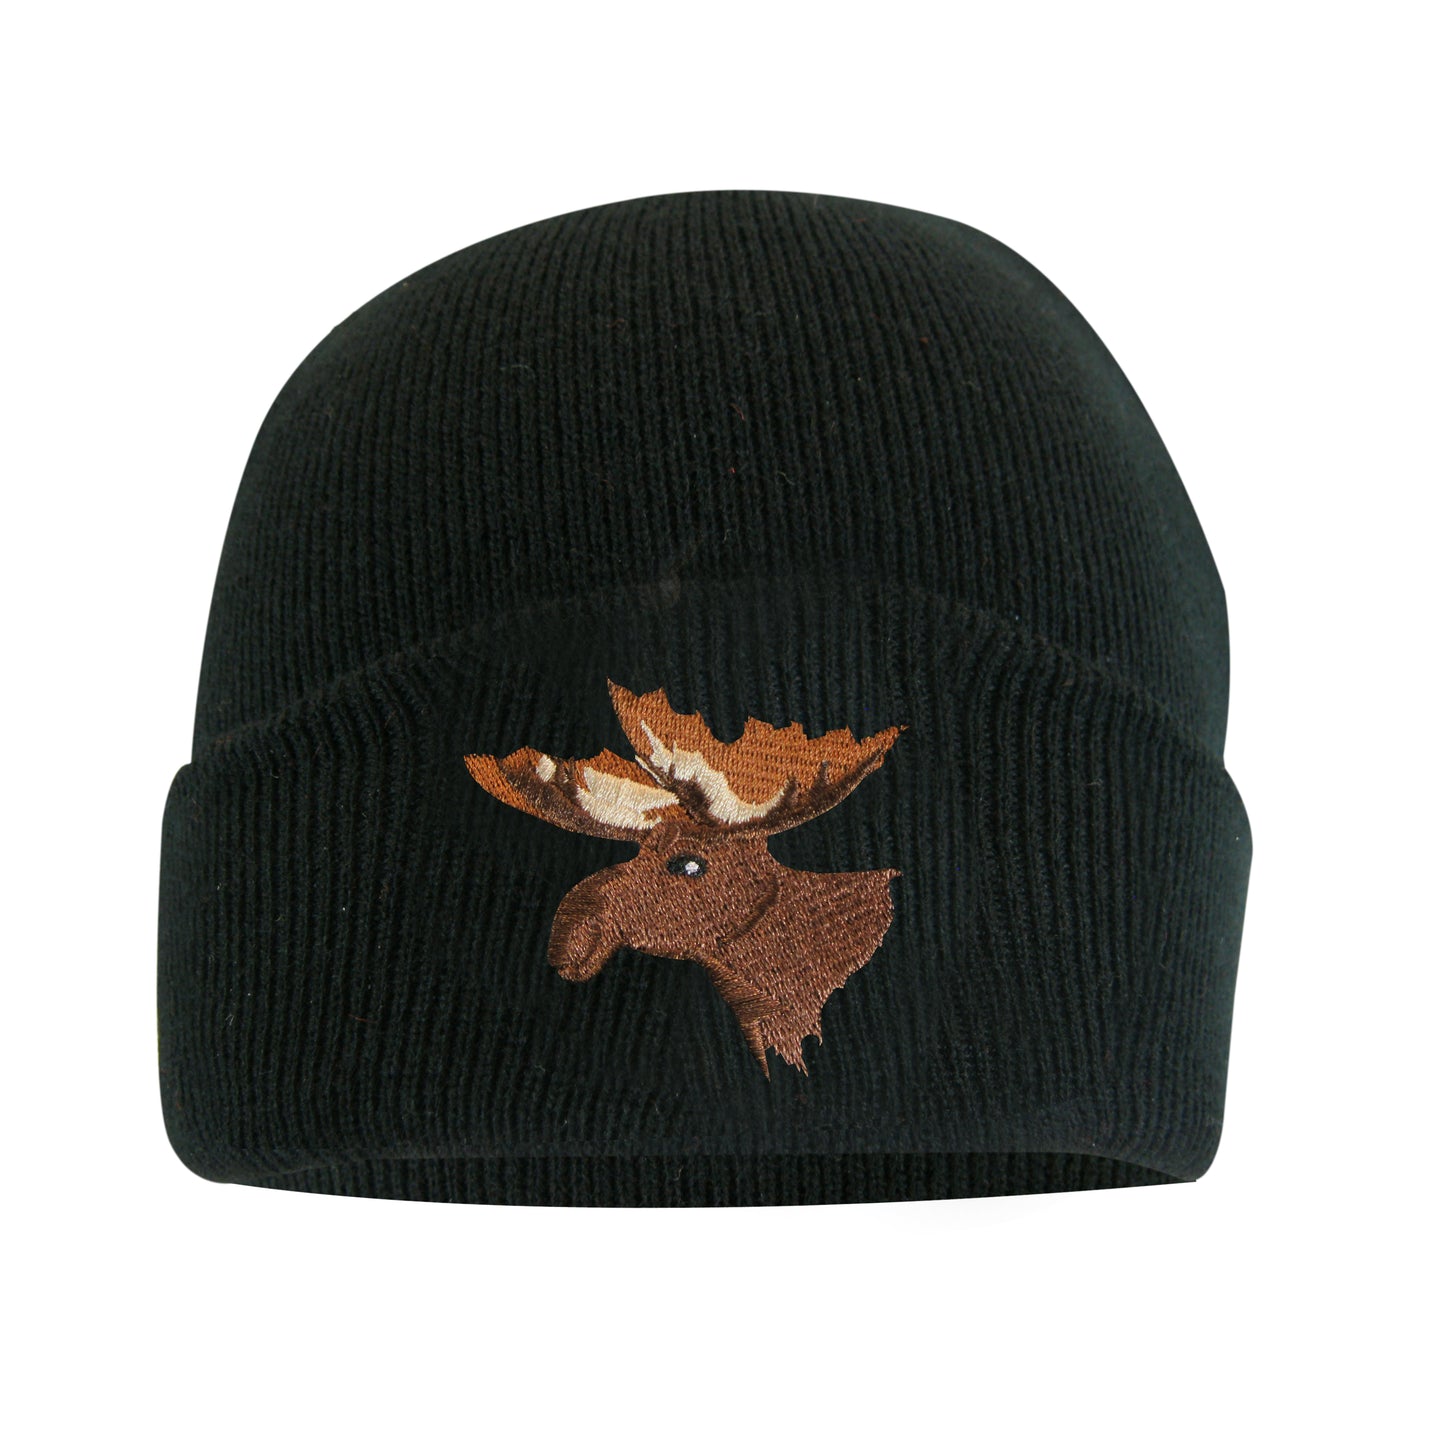 TUQUE DOUBLÉE THERMAKEEPER AVEC BRODERIE D’ANIMAL JACKFIELD